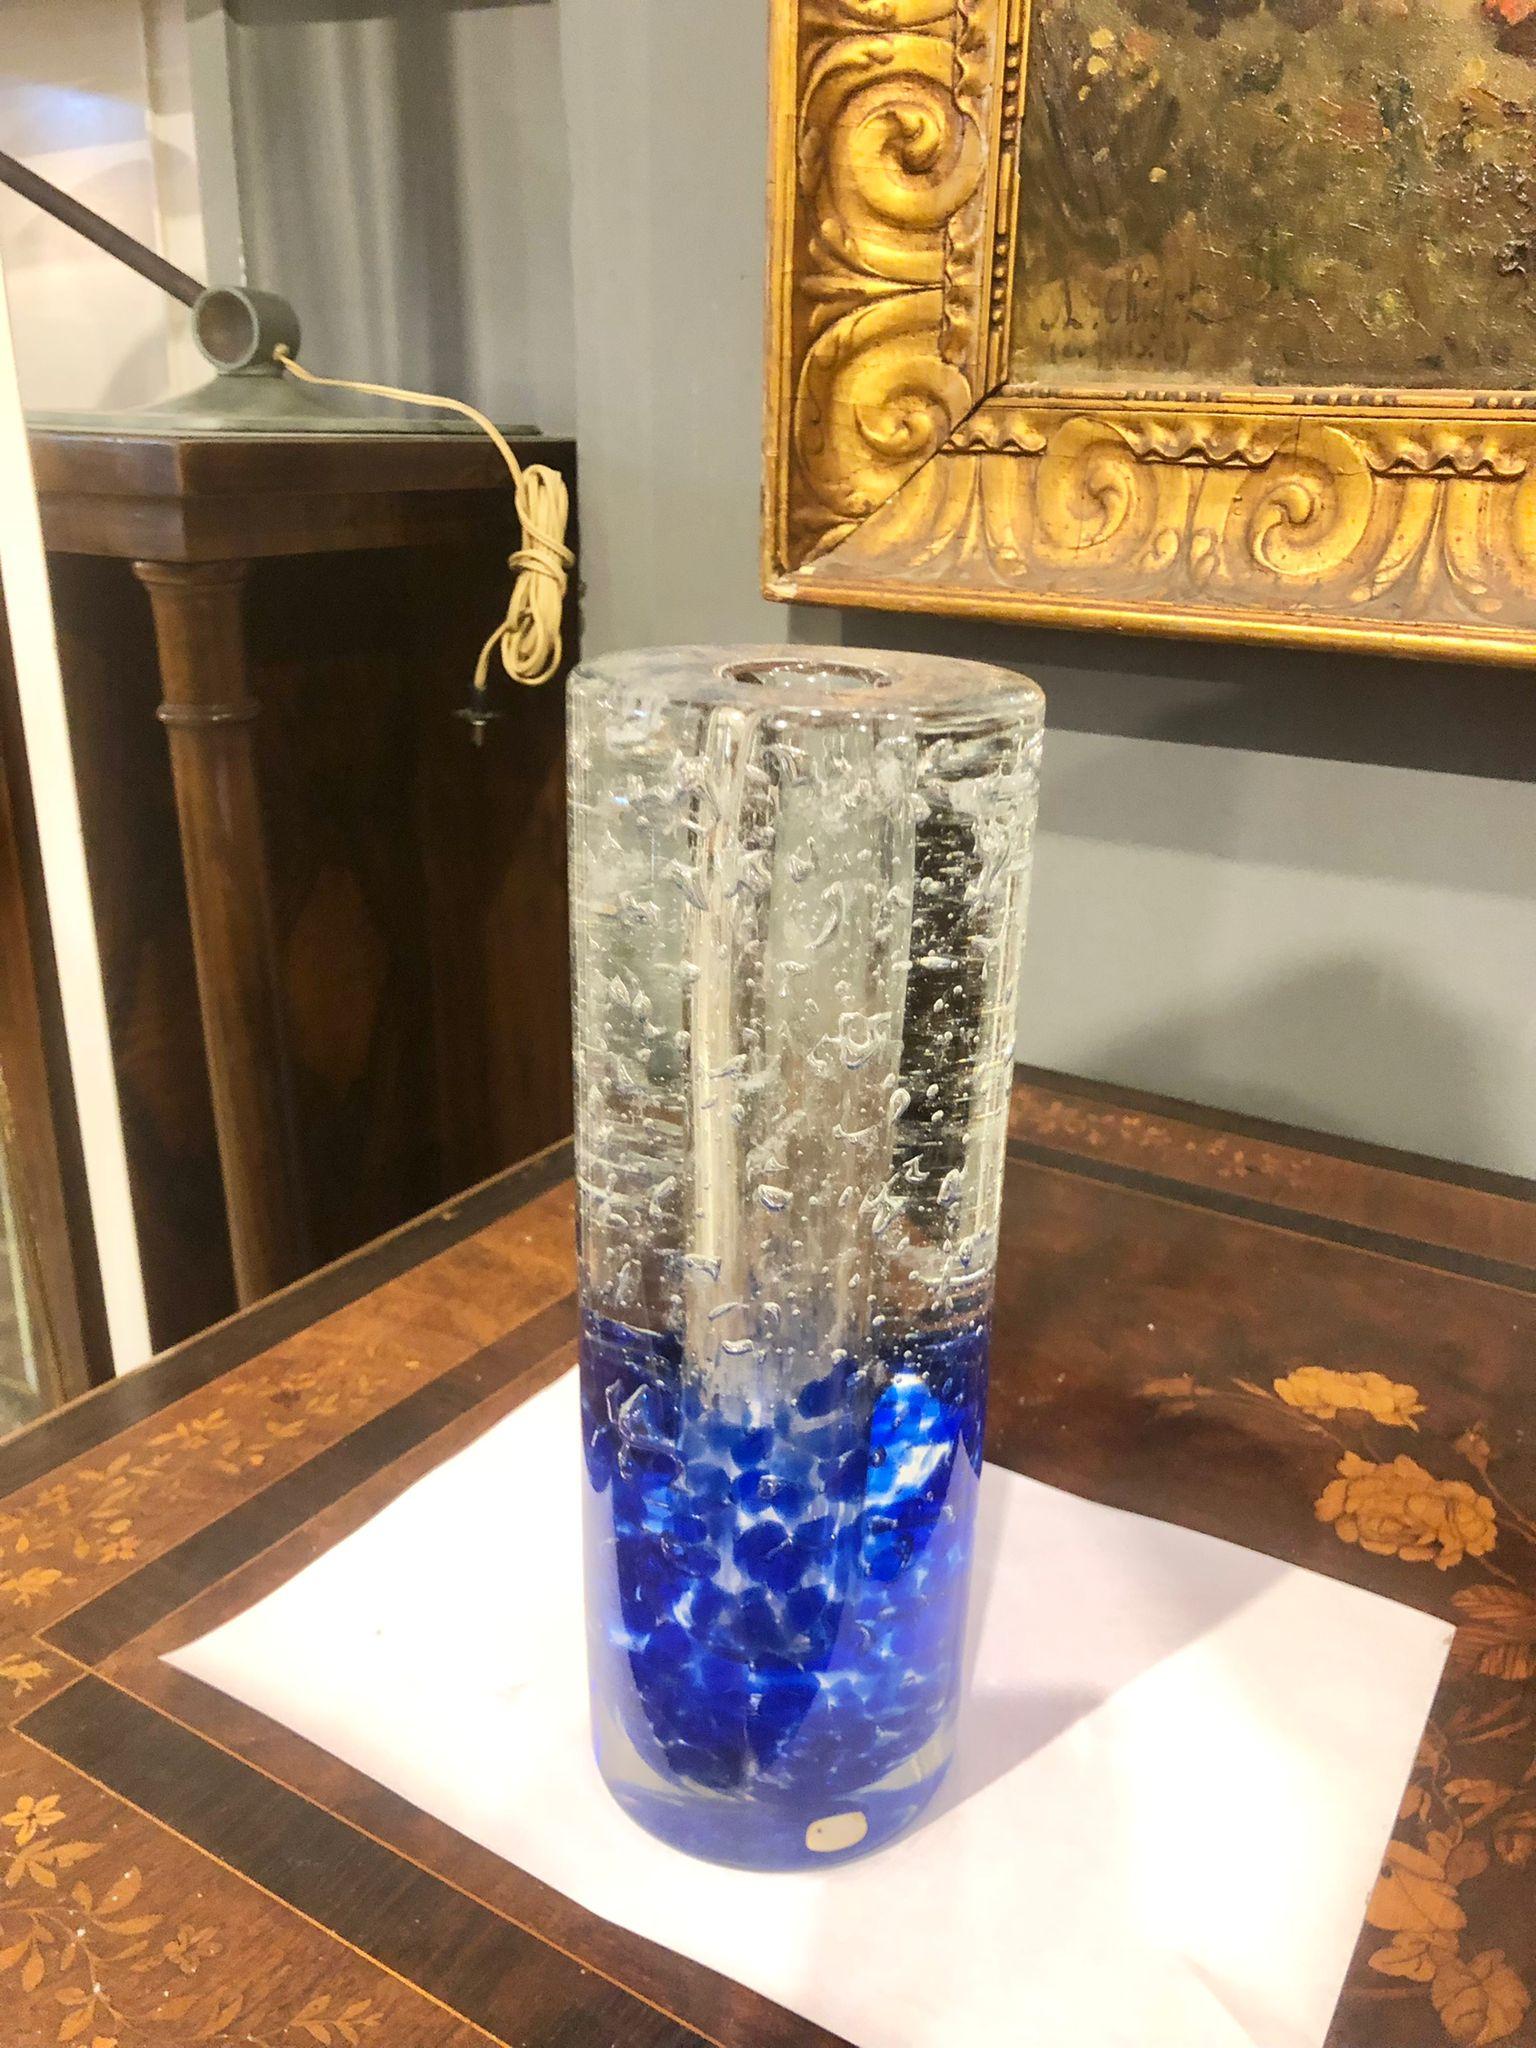 This Murano glass vase has the same workmanship as a 